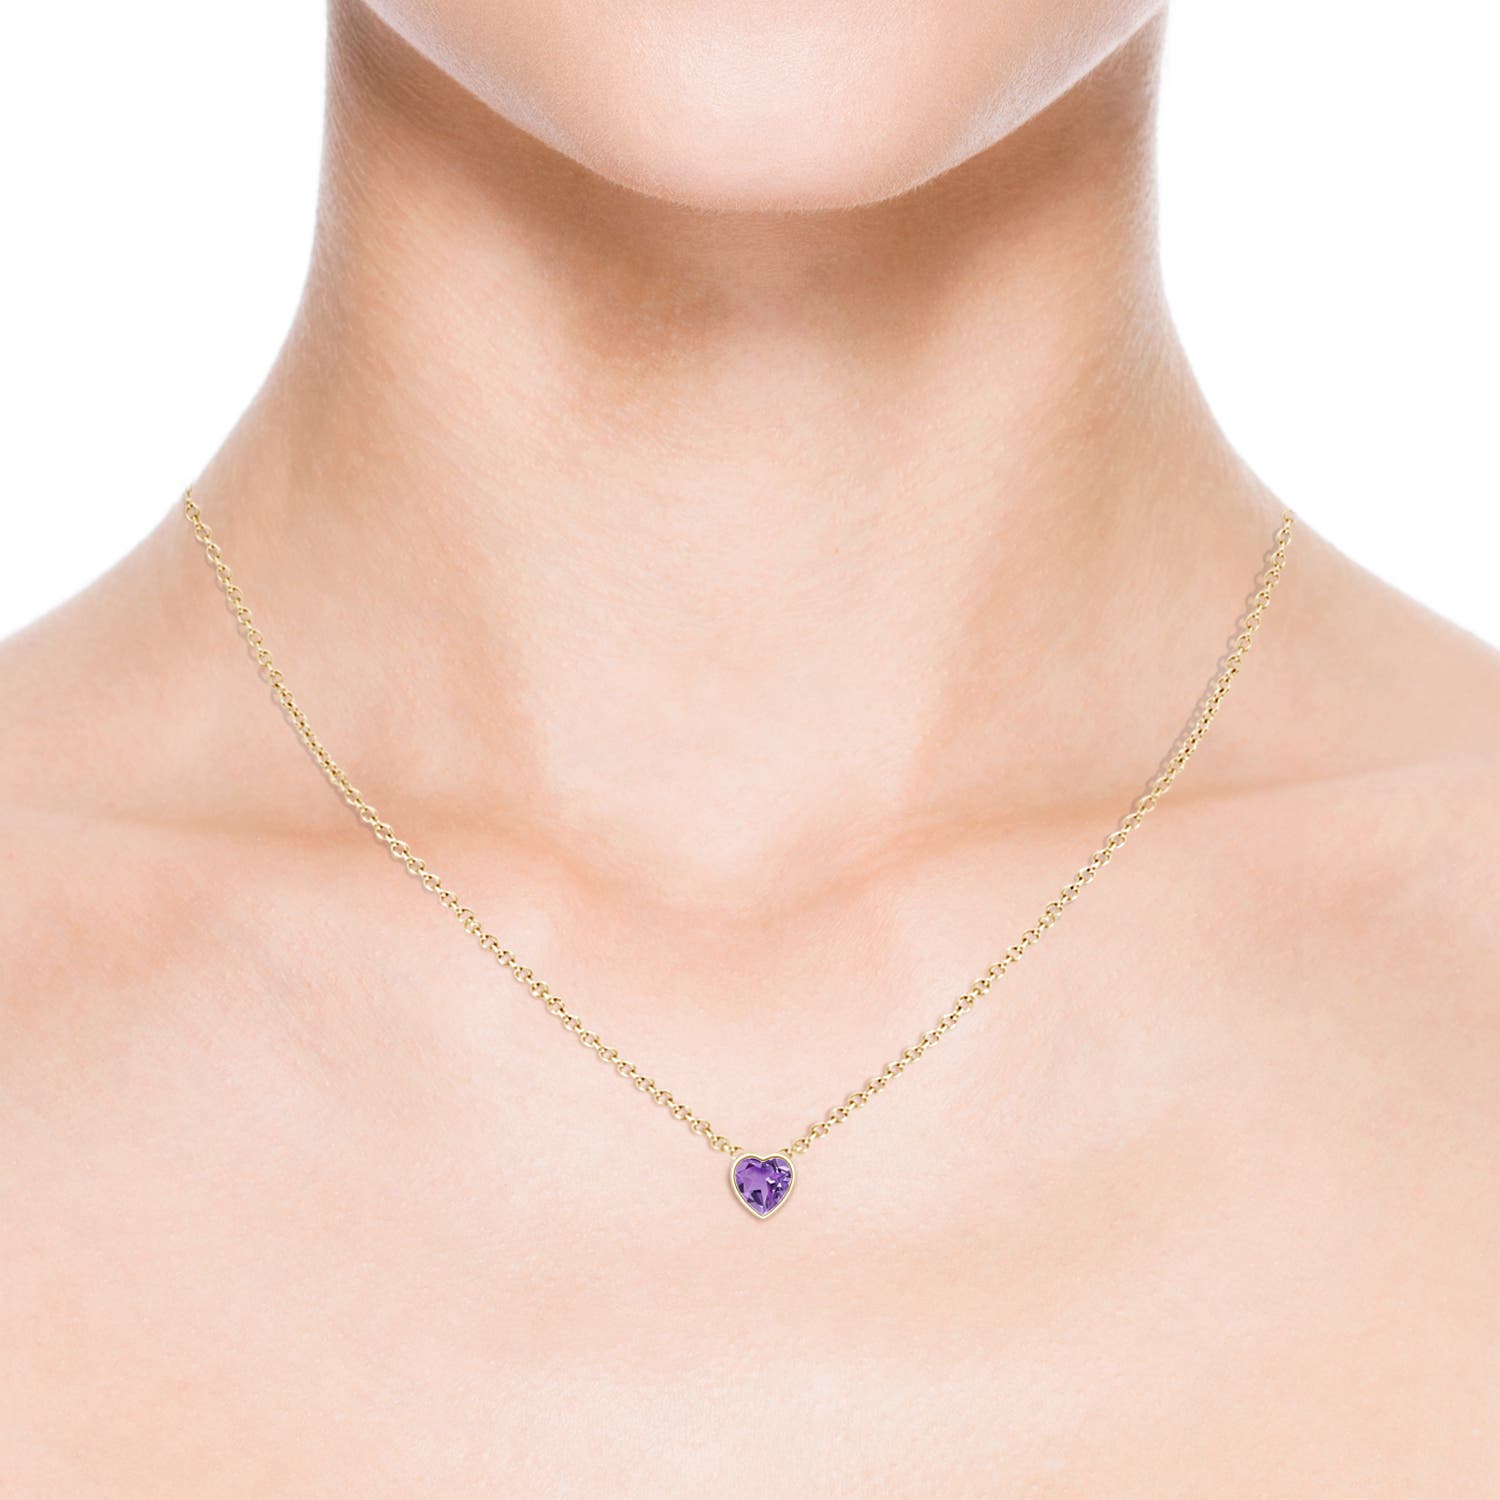 A - Amethyst / 0.35 CT / 14 KT Yellow Gold